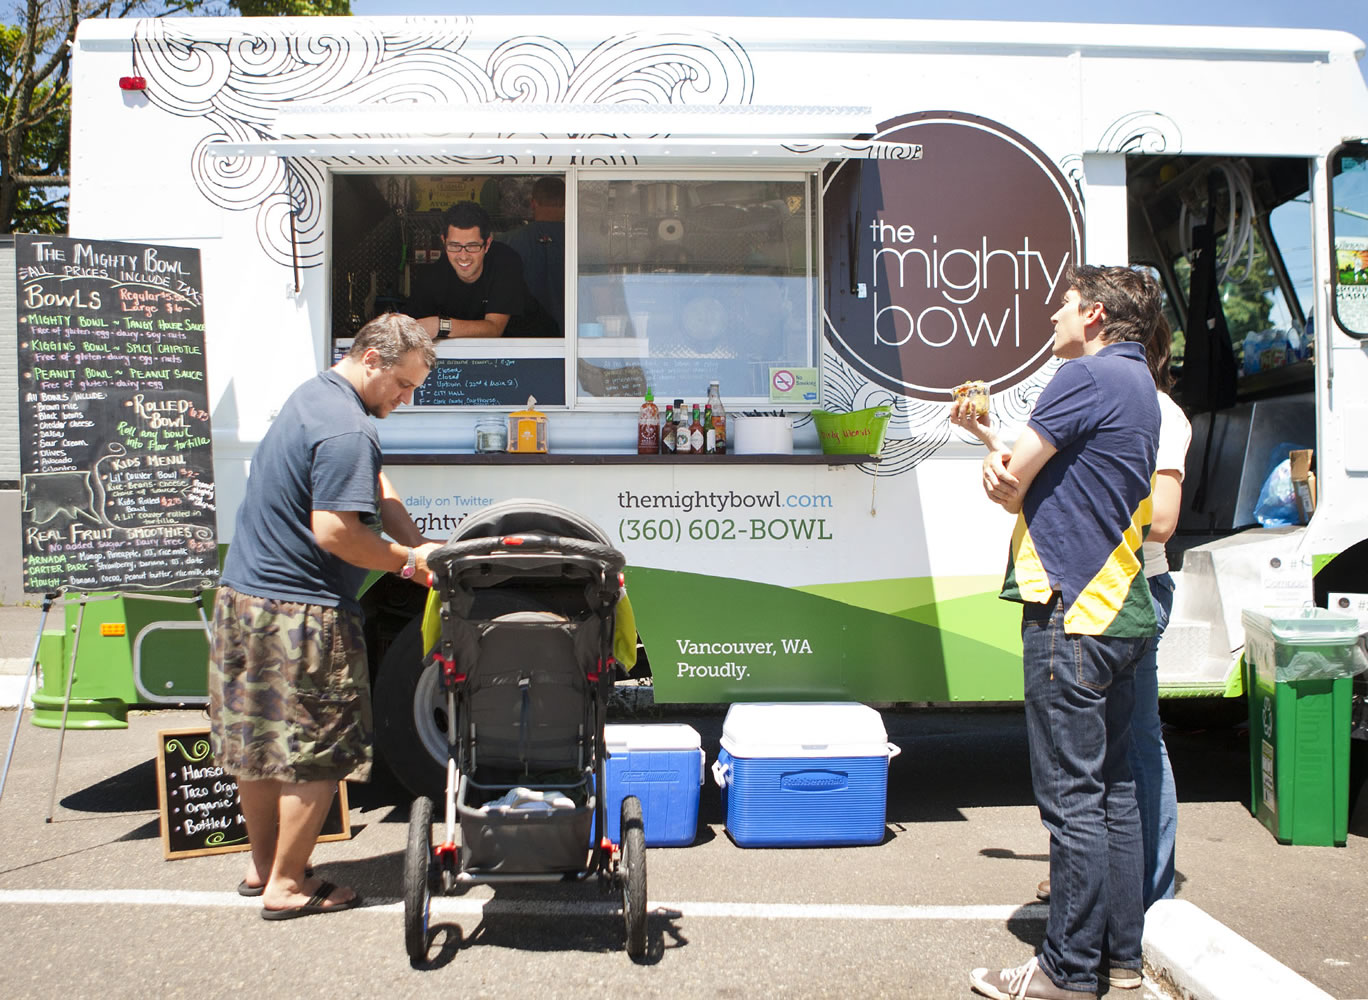 Customers gather at The Mighty Bowl, the first mobile food truck in Vancouver, at the intersection of East 22nd and Main streets at lunch on Wednesday.